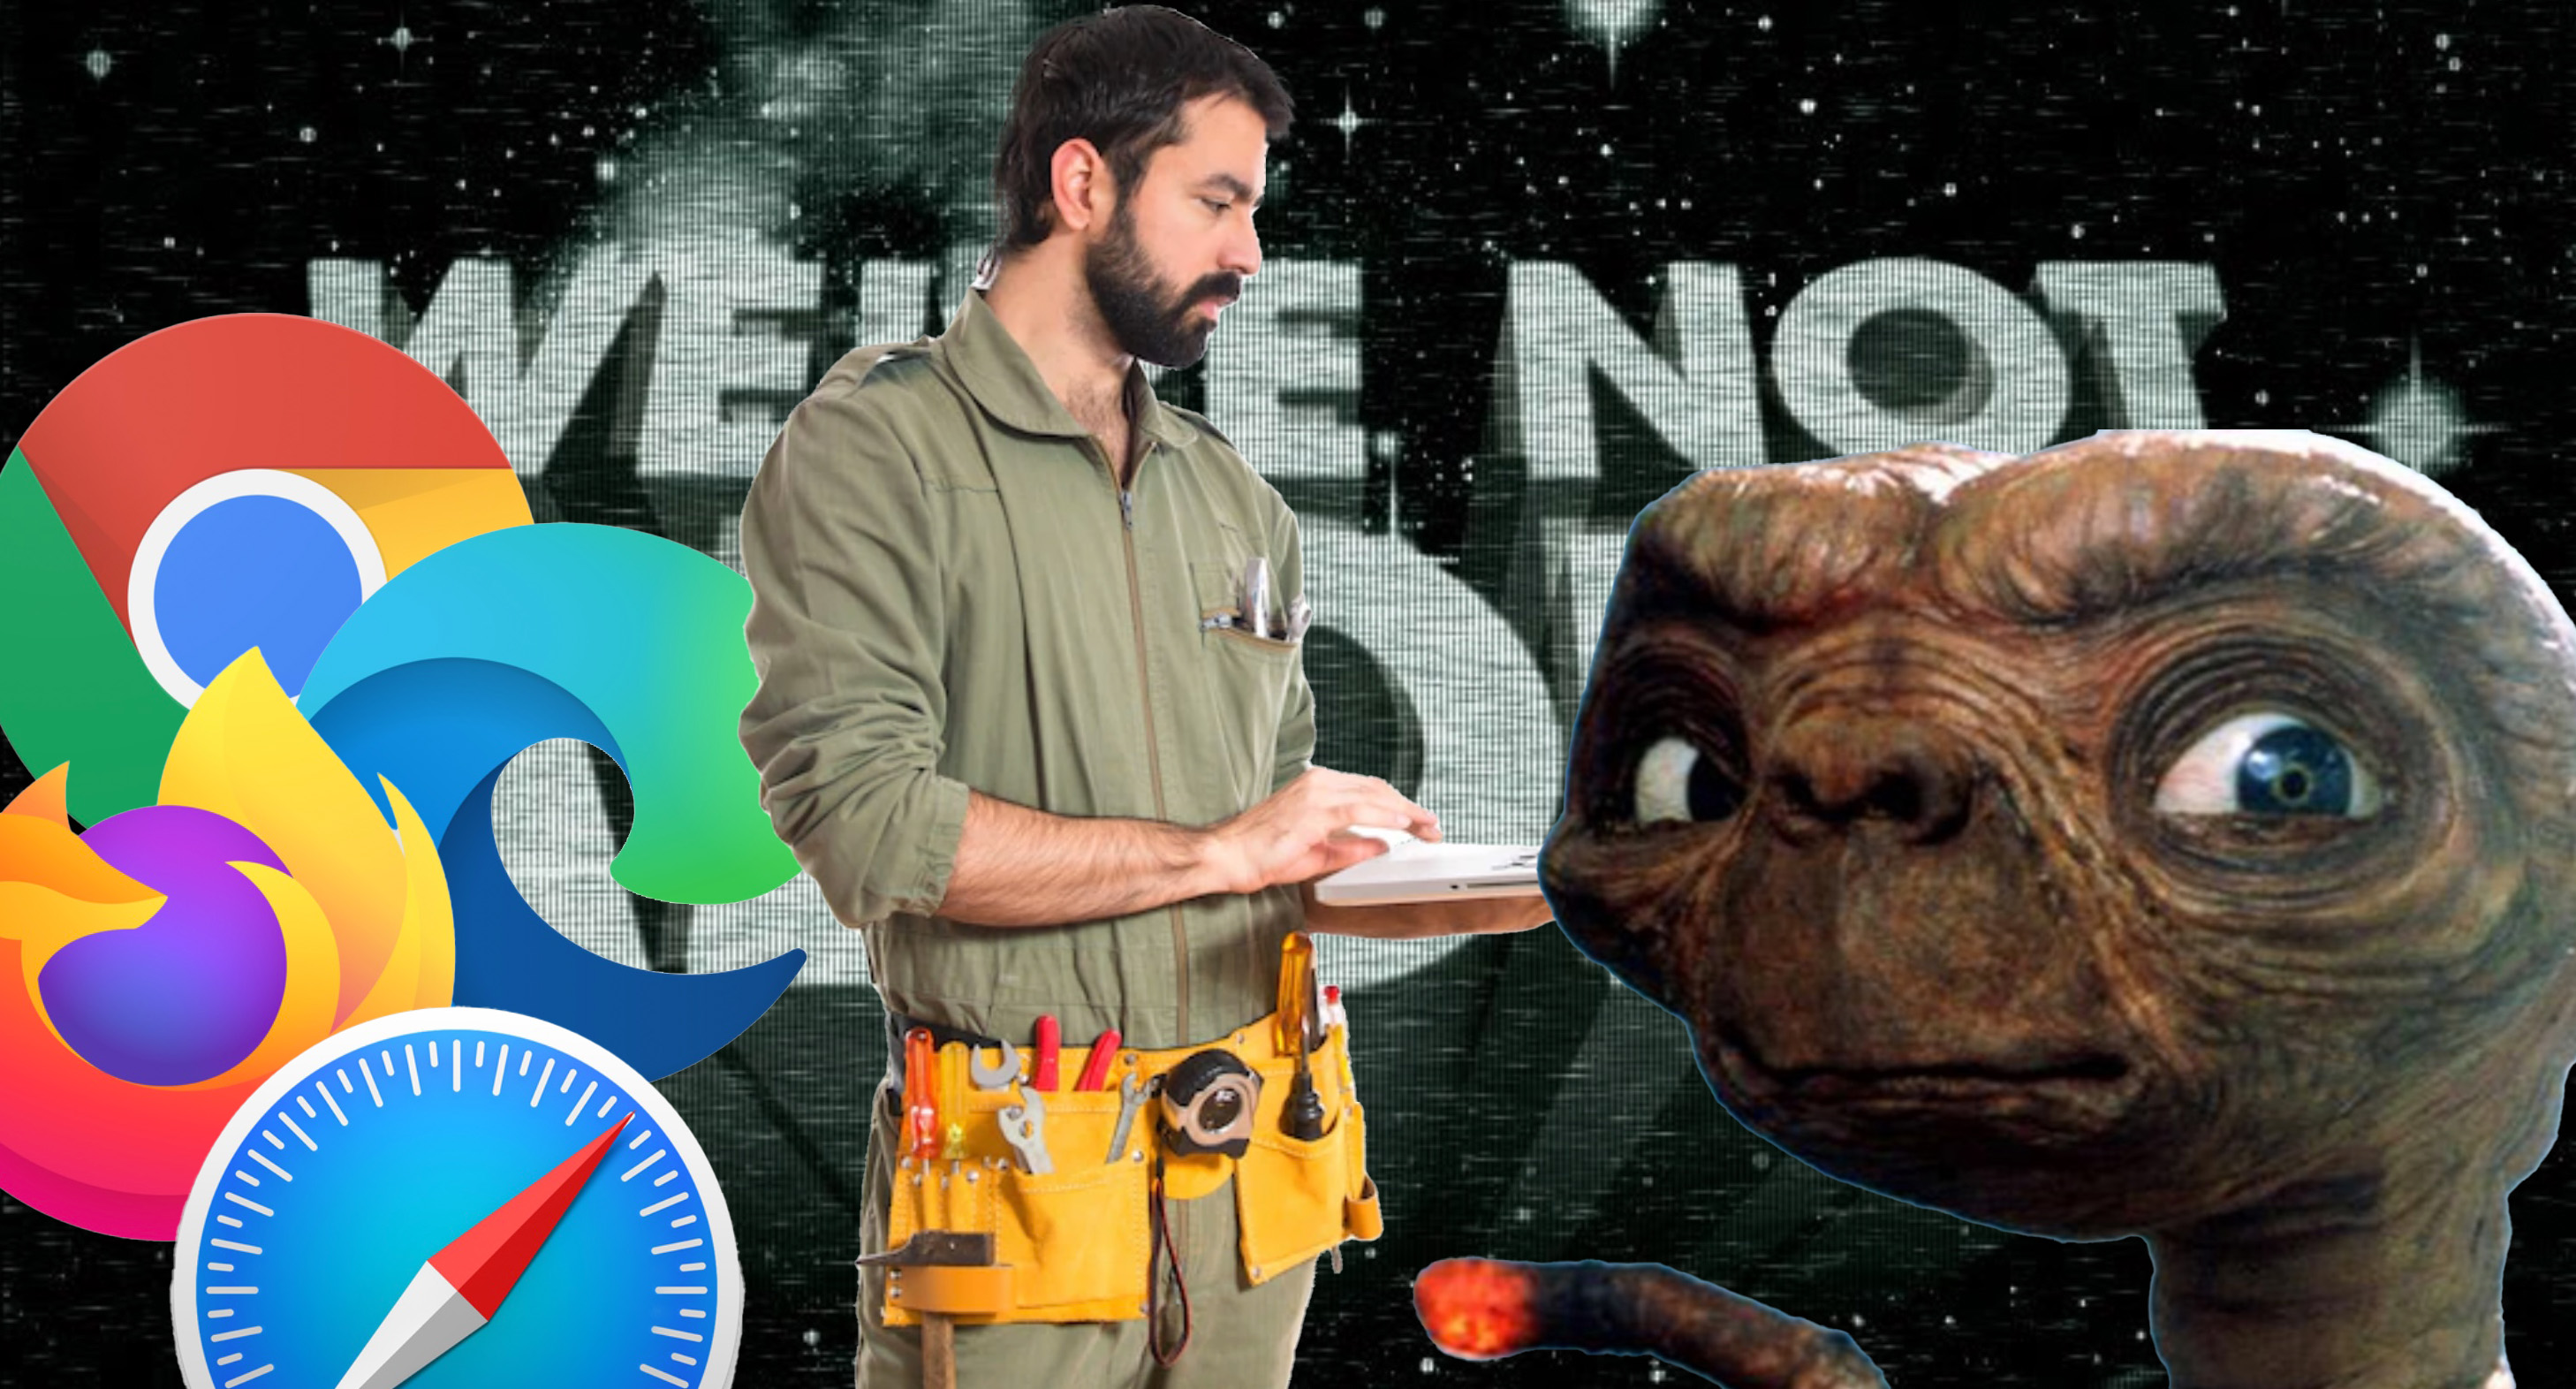 We're Not Alone, with browser logos, a guy in construction clothes carrying a laptop, and ET
